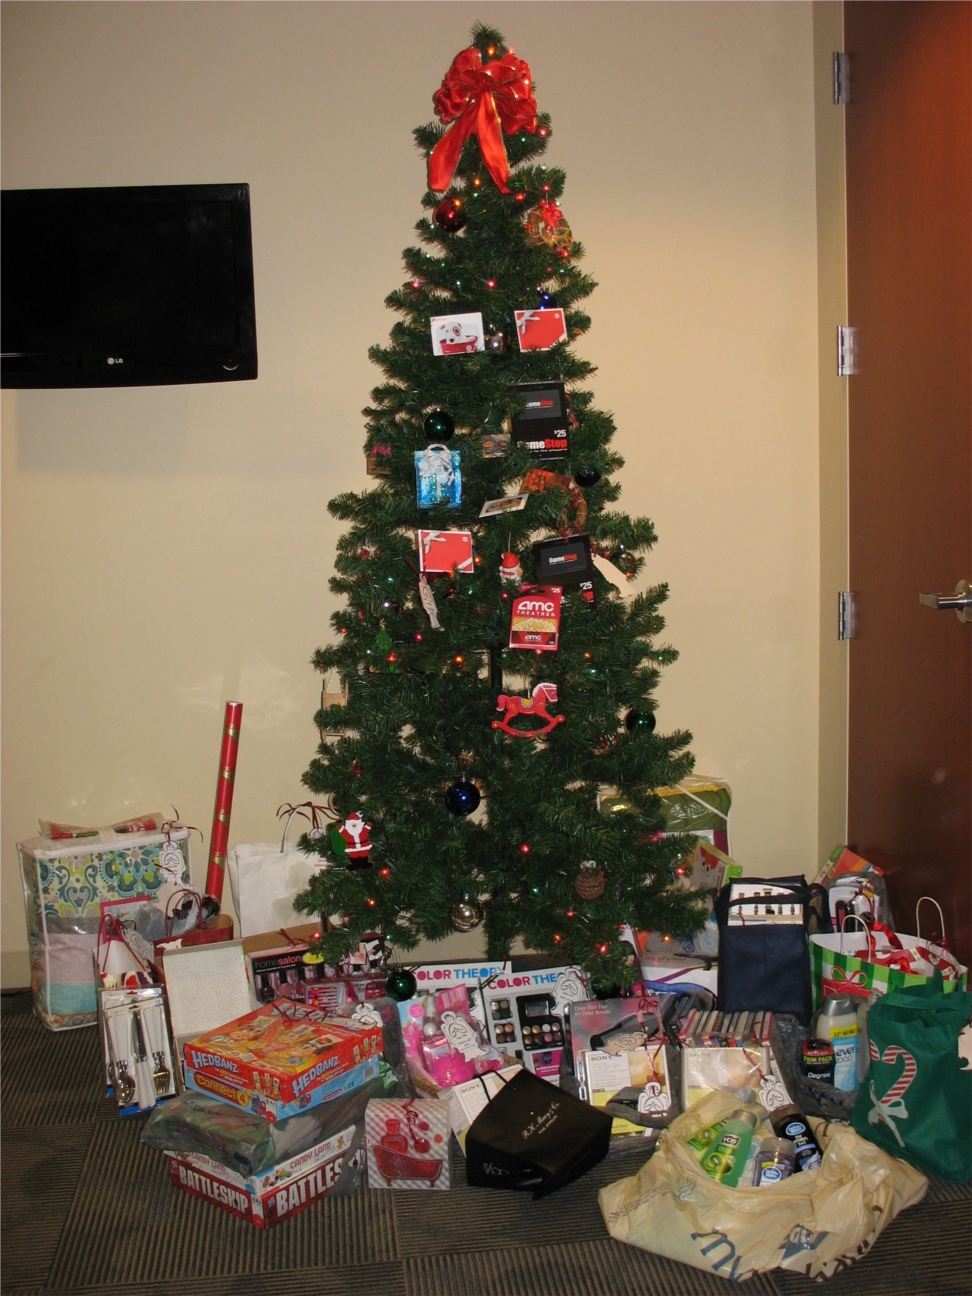 The Hartford’s employees in Tampa collected gifts for children in need this holiday season.